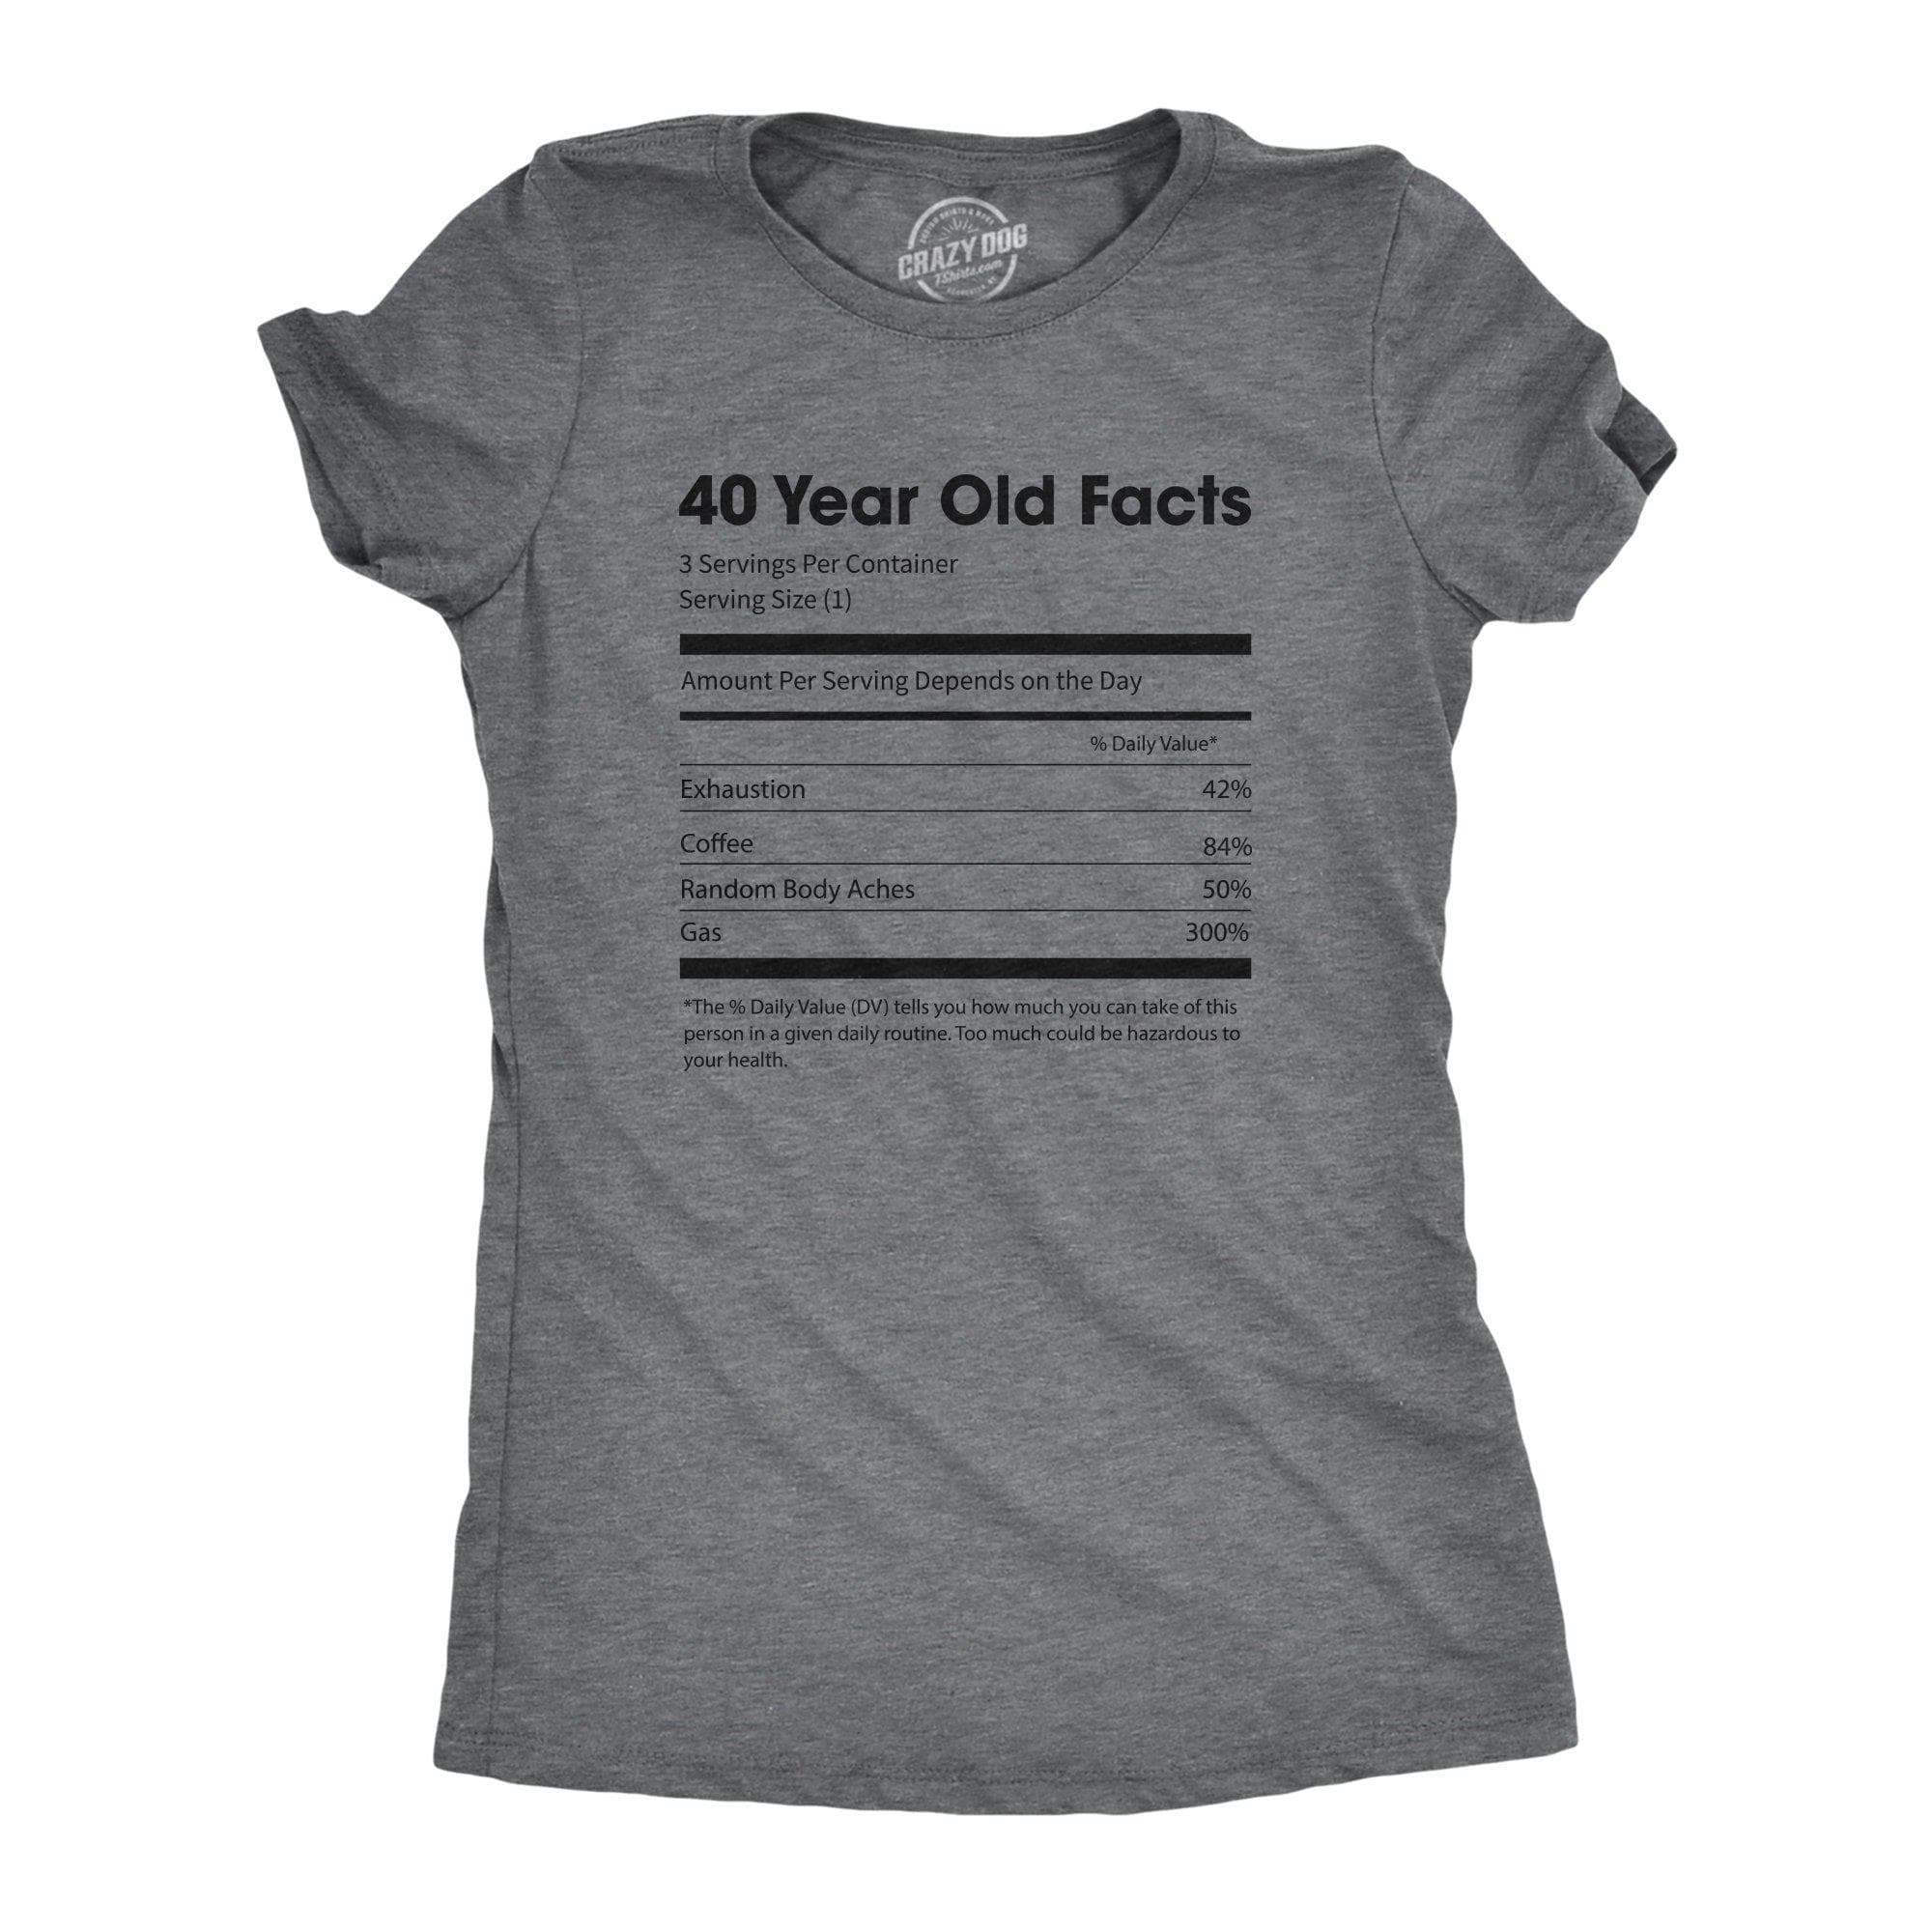 40 Year Old Facts Women's Tshirt - Crazy Dog T-Shirts